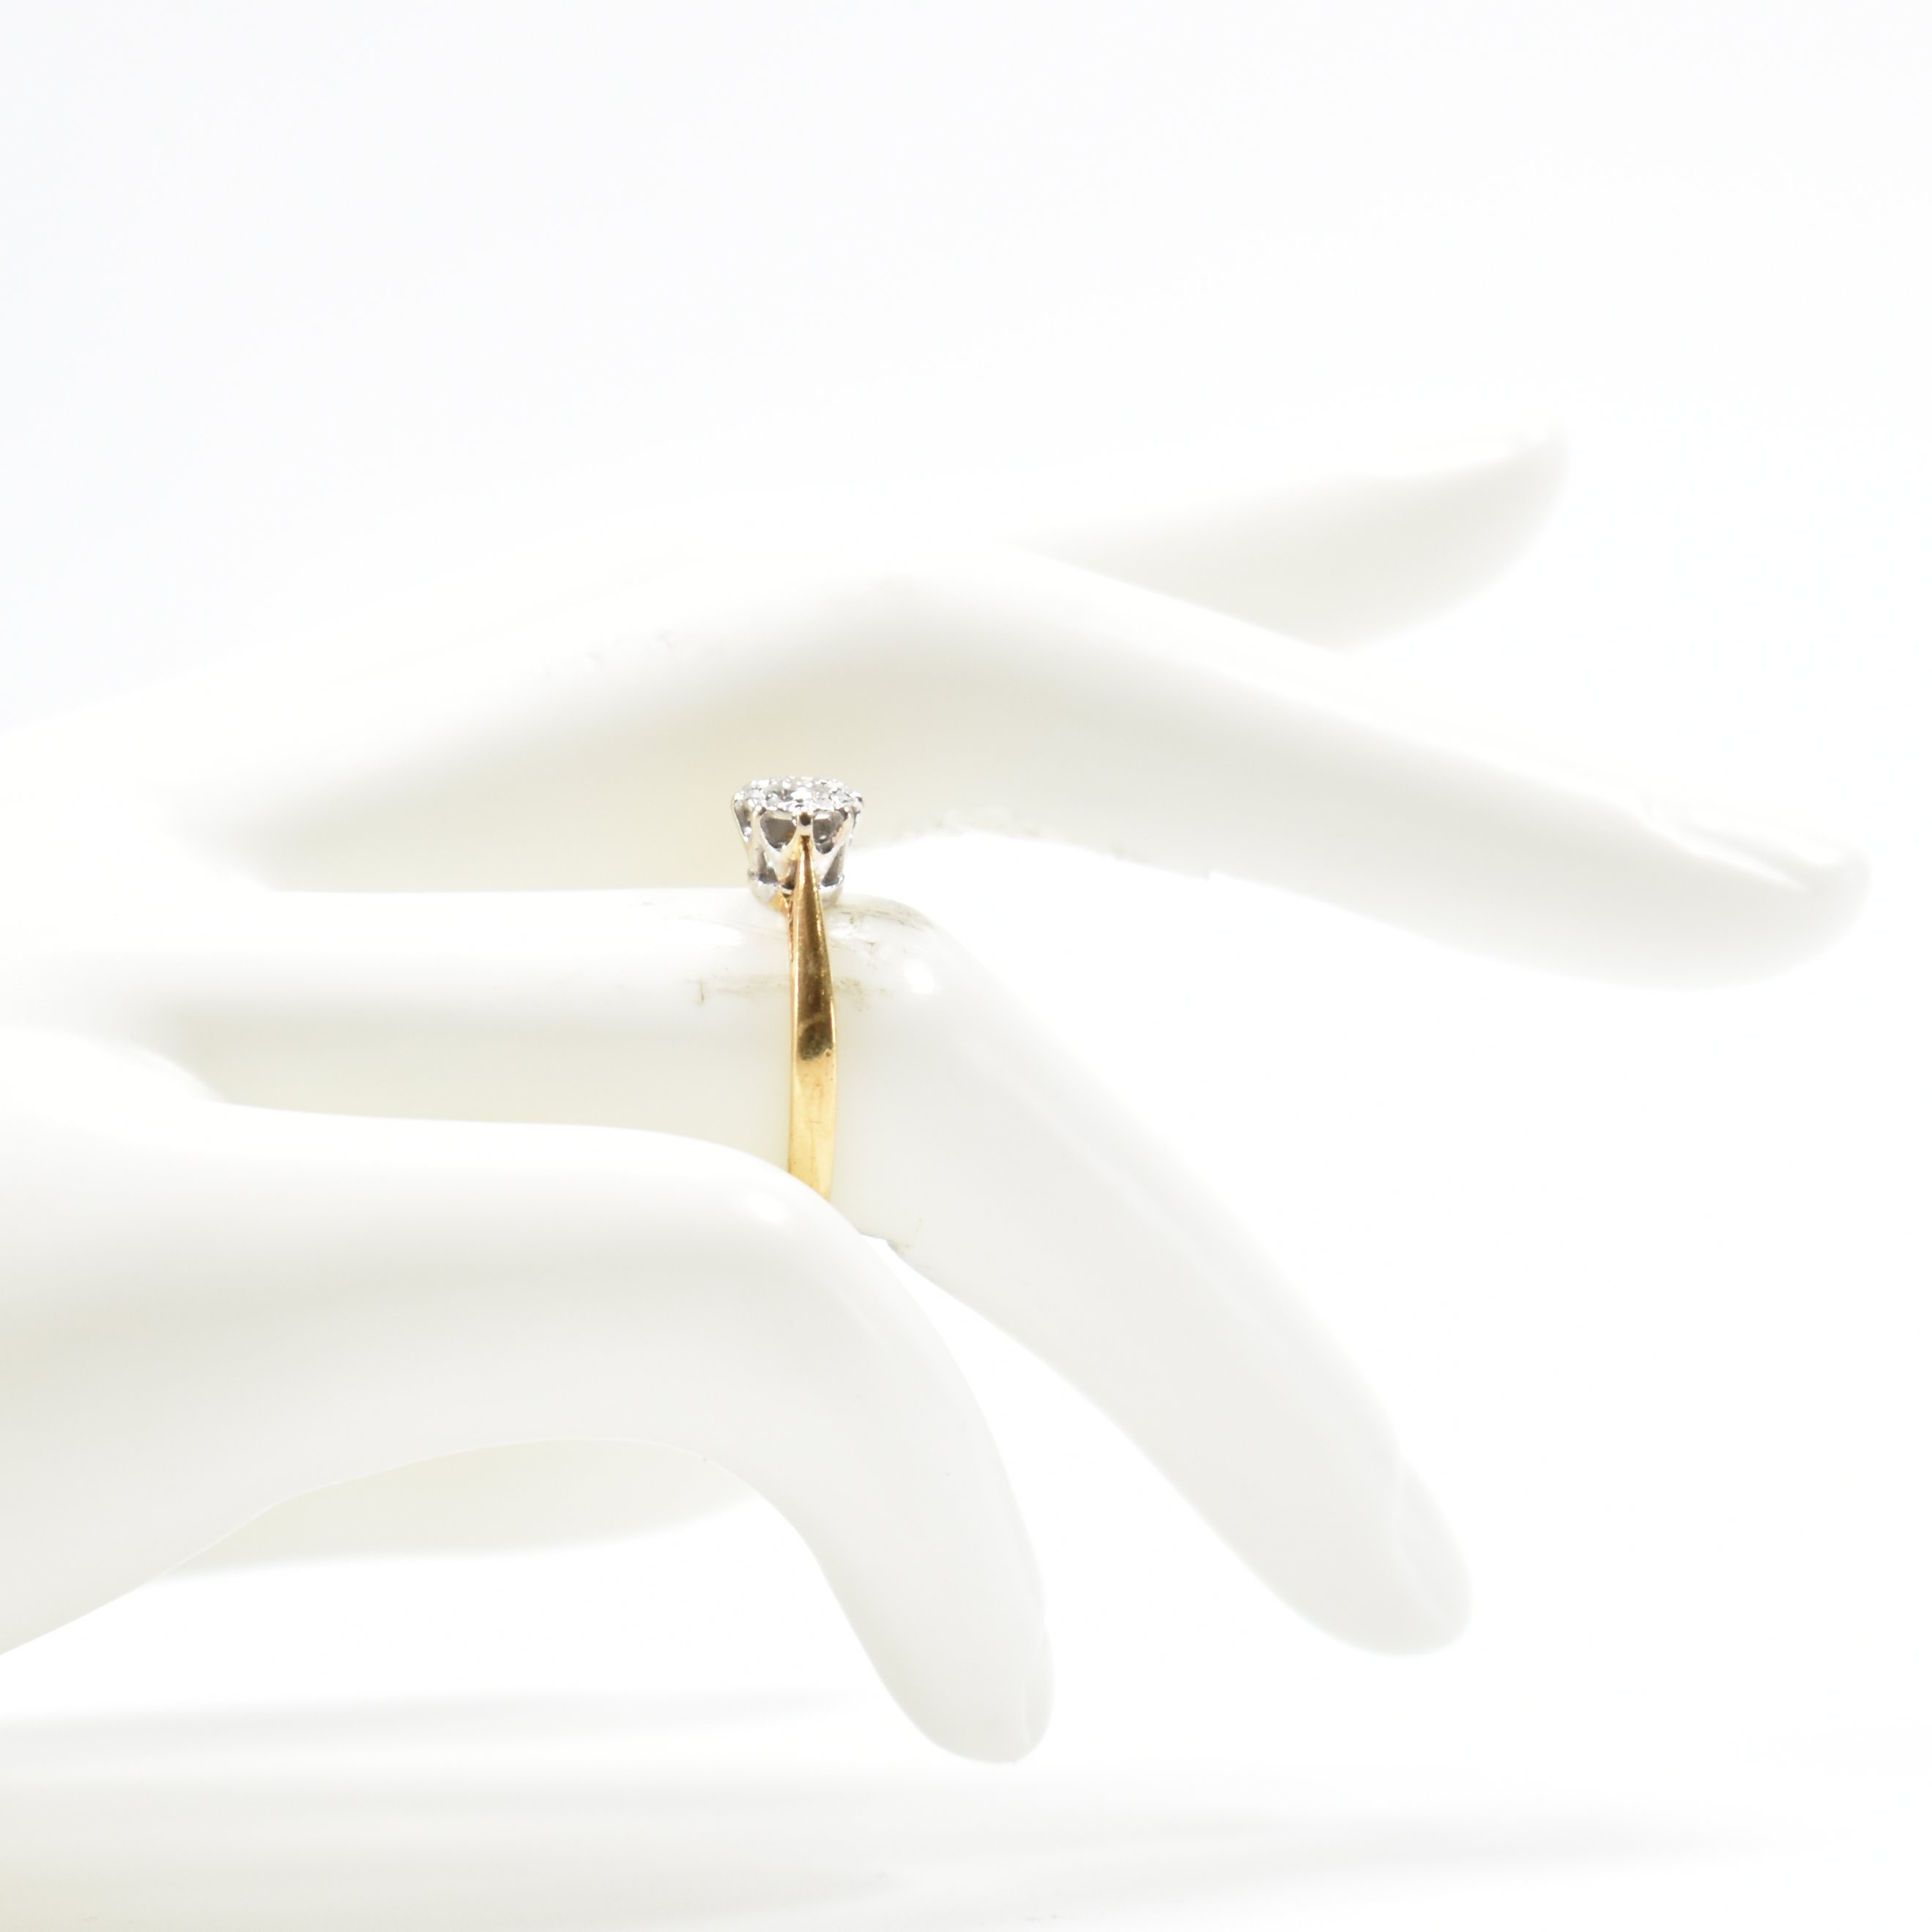 HALLMARKED 18CT GOLD & DIAMOND SOLITAIRE RING - Image 8 of 8